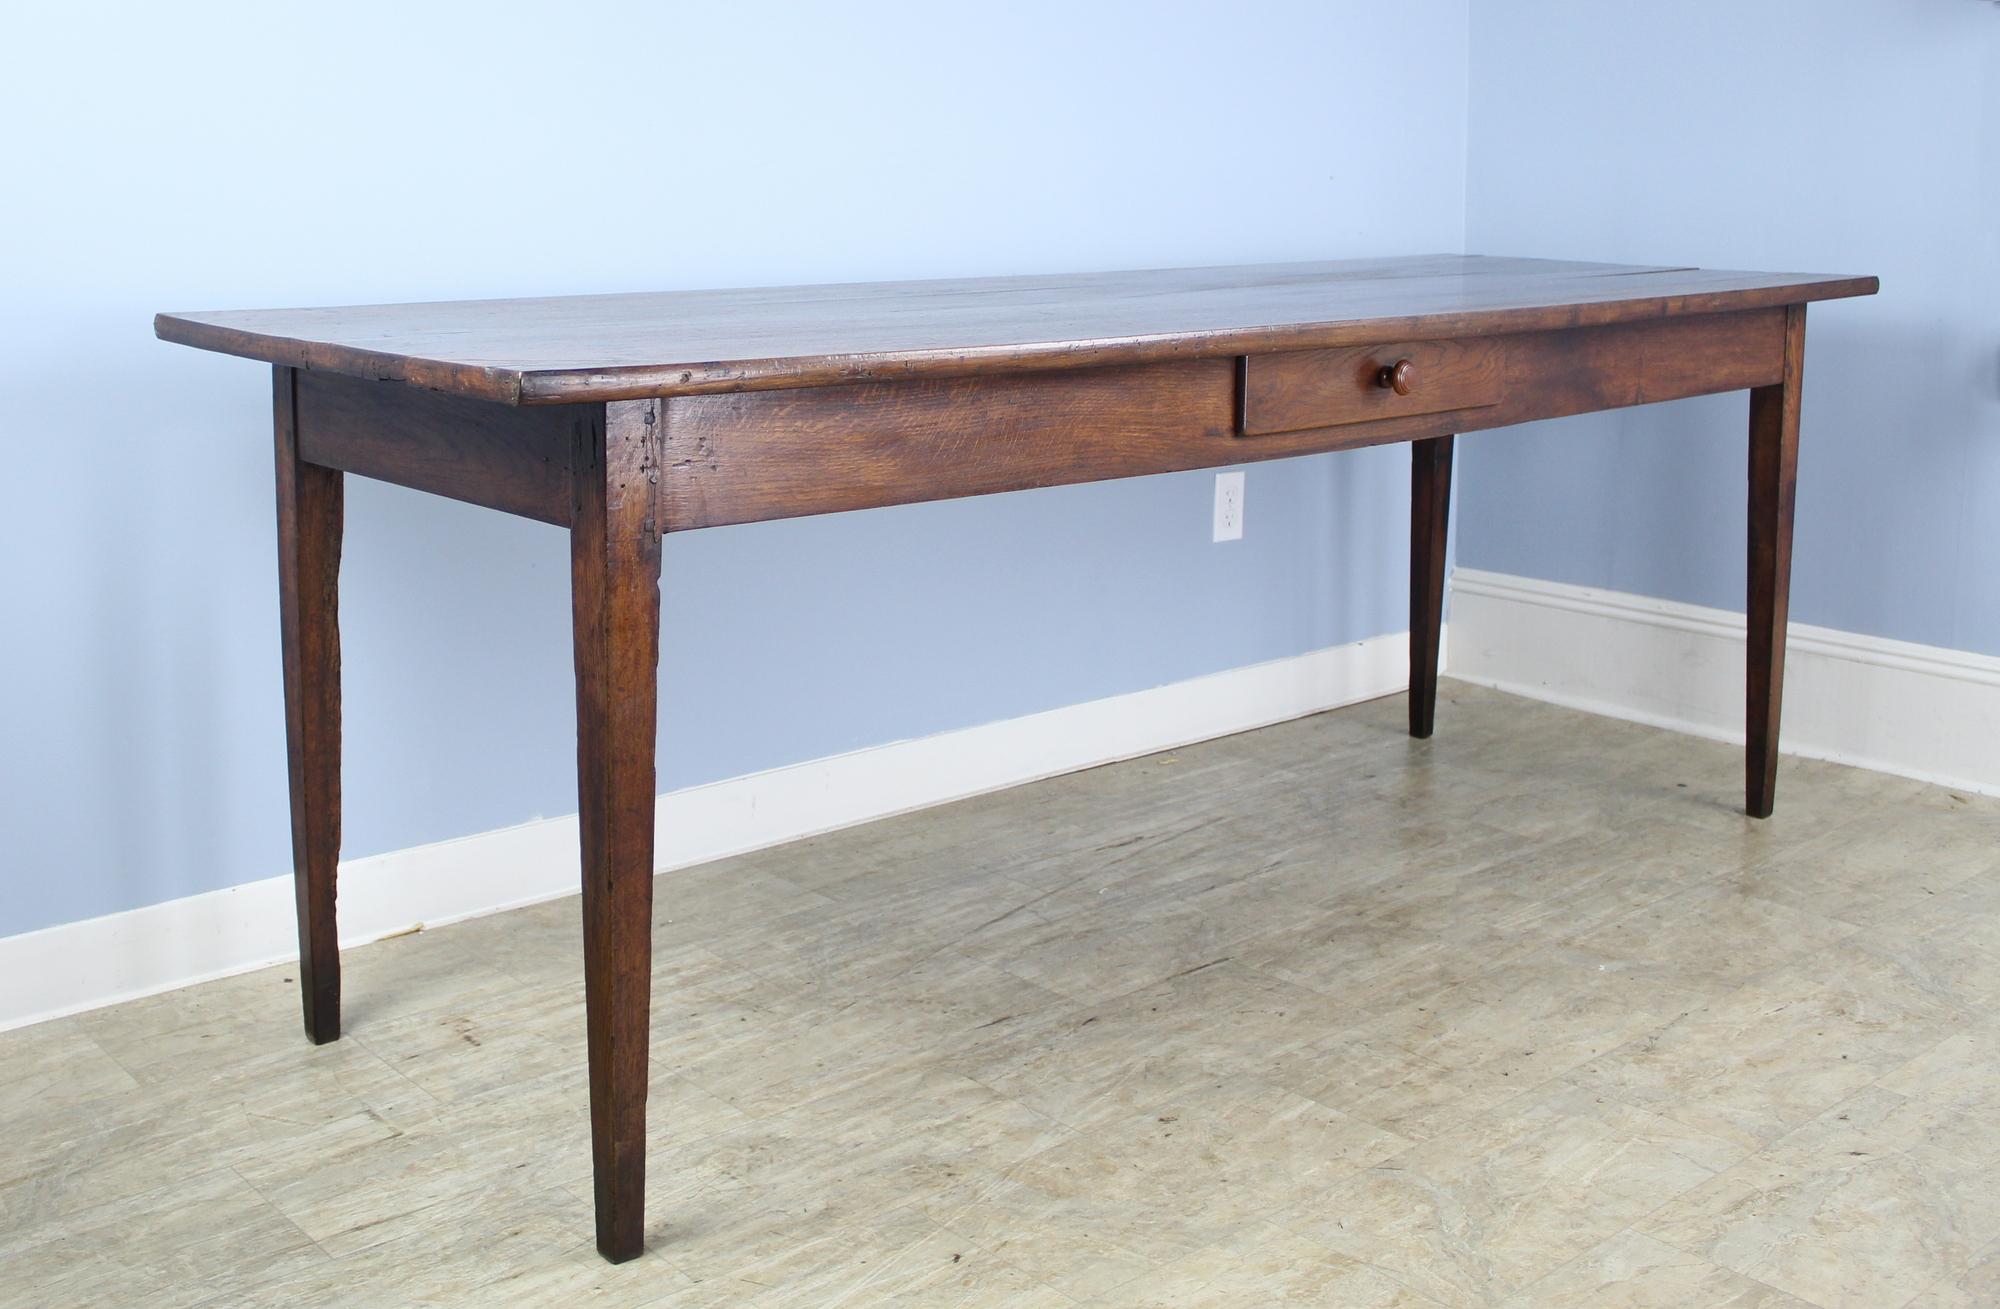 A long narrow farm table with glorious color and shine. The chestnut top has interesting grain, and the elegant tapered legs add to the look. The single drawer in the apron lends a nice visual note. There is some age appropriate wear on the left